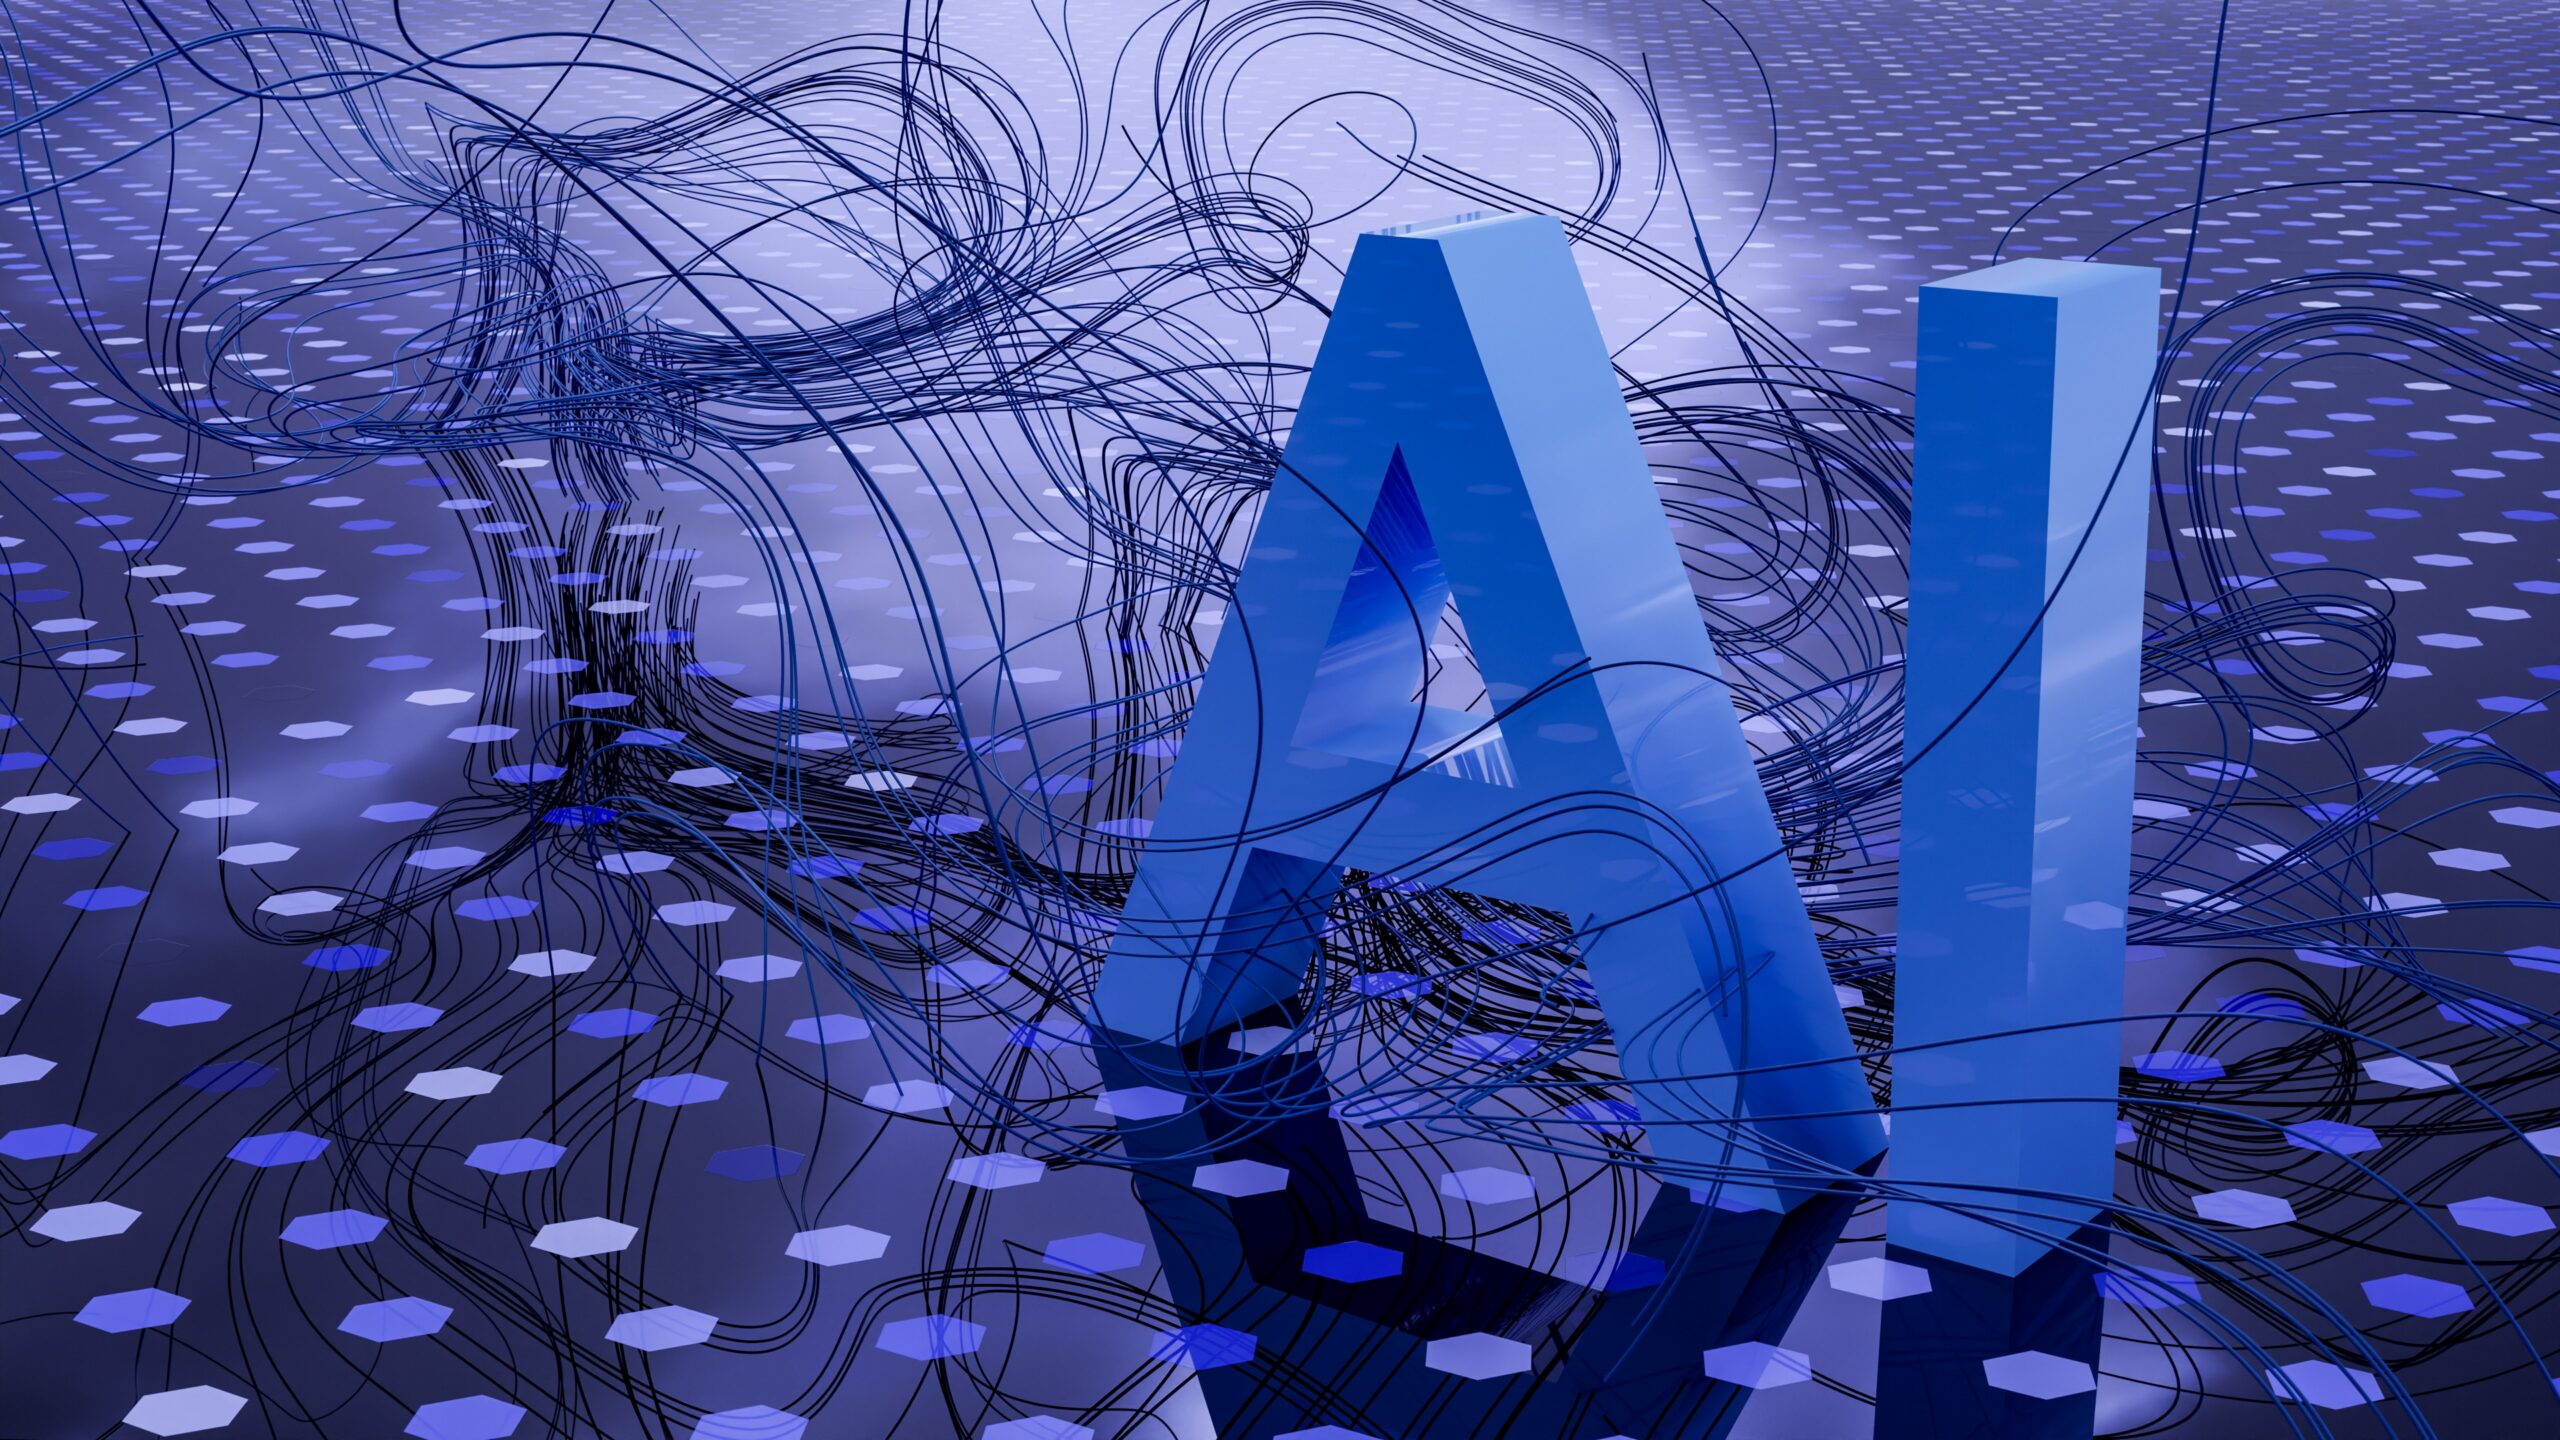 3D illustration with computer wires and the letters AI in the forefront.